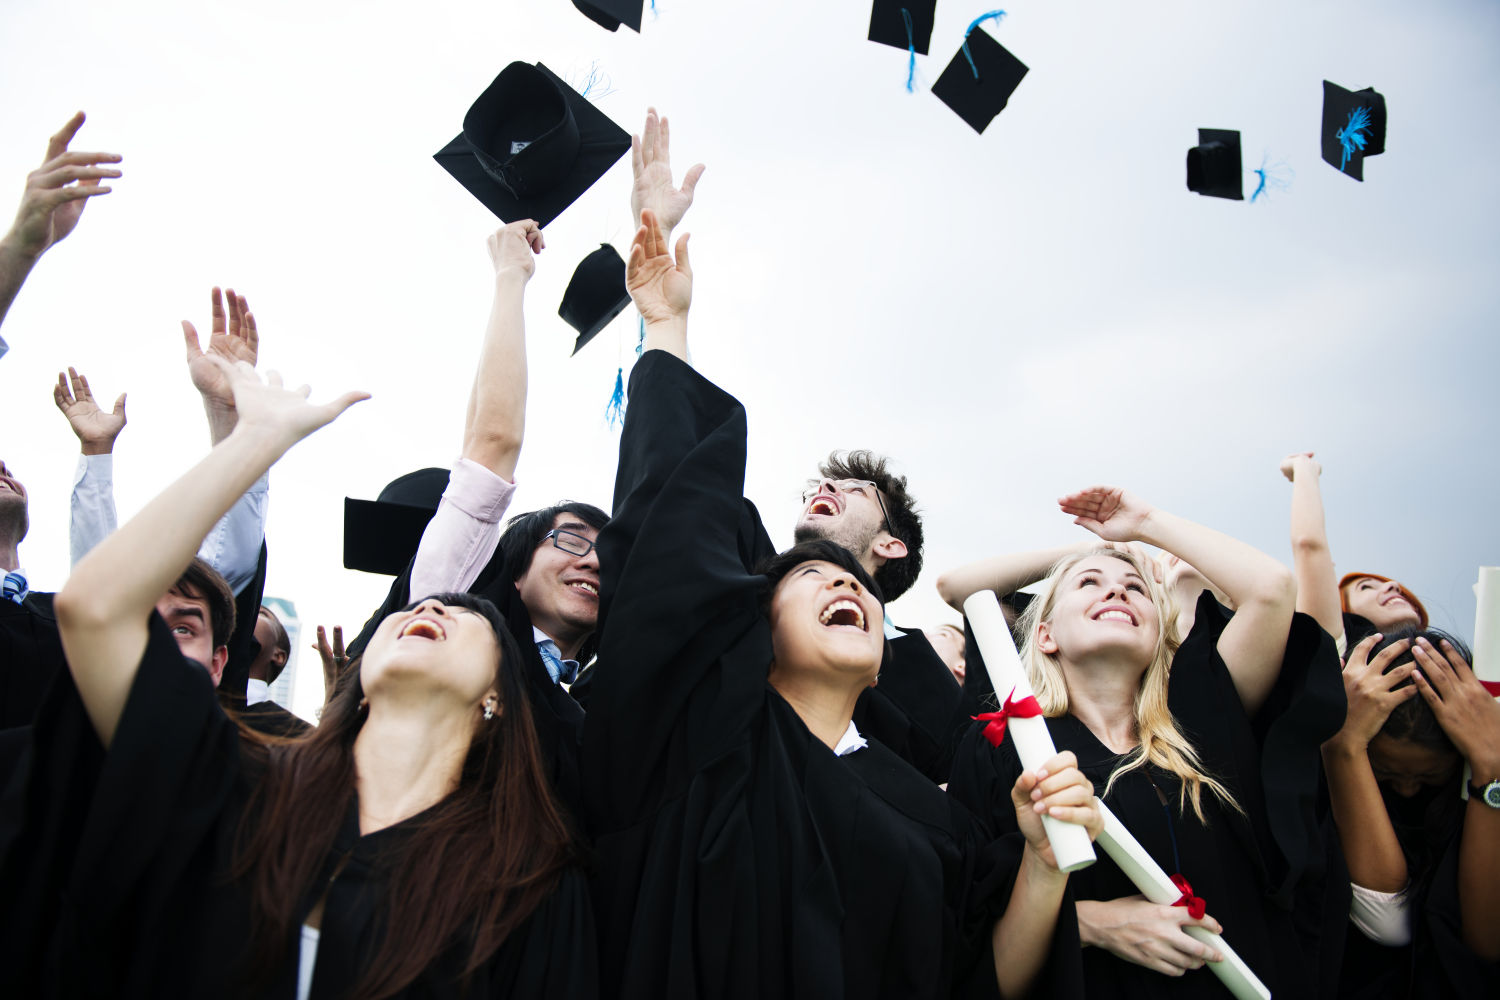 https://www.freepik.com/free-photo/group-diverse-grads-throwing-caps-up-sky_3366984.htm#query=graduates%20position=3%20from%20view=search%20track=sph